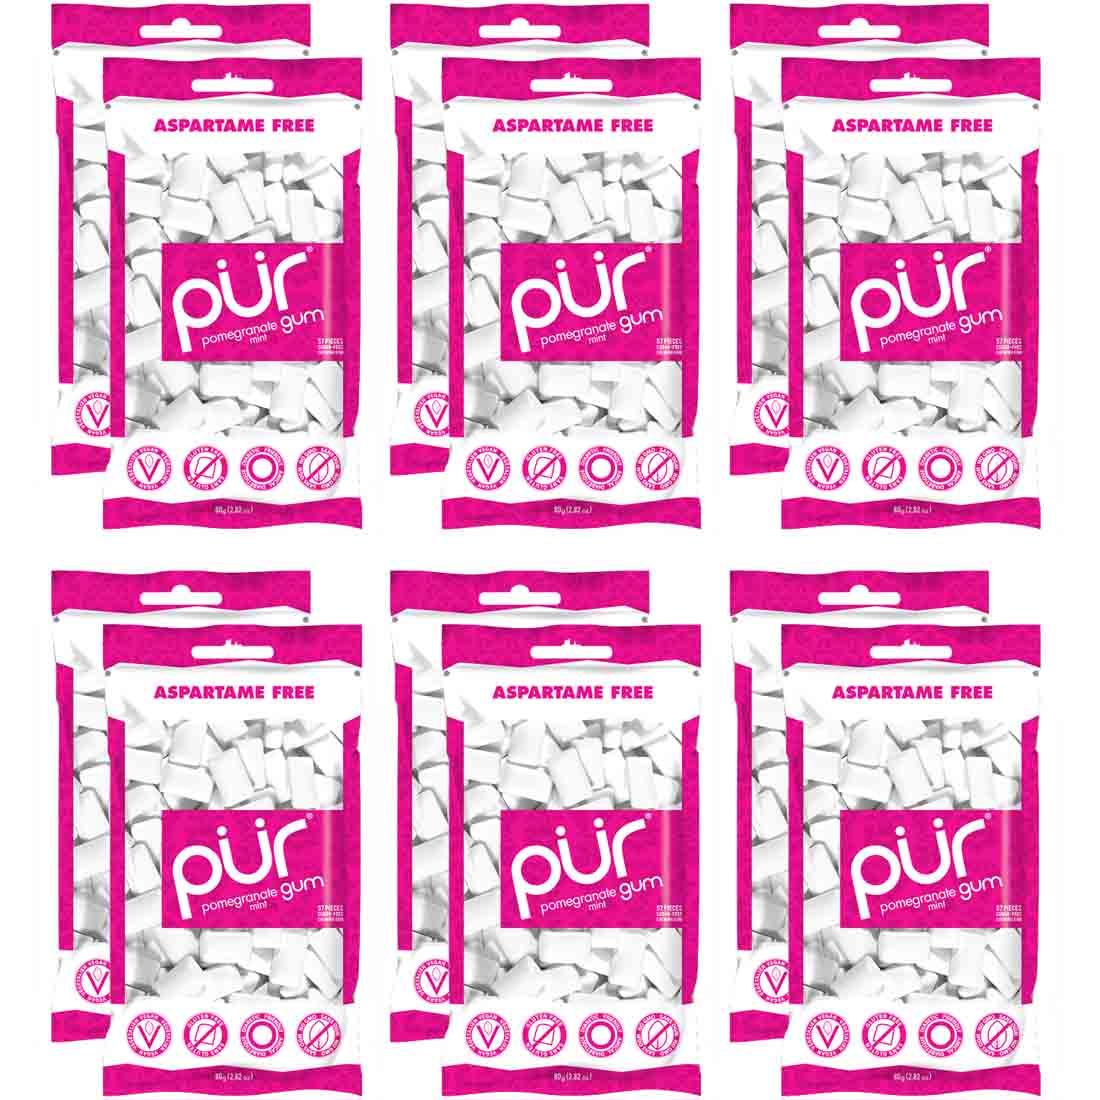 Pur Chewing Gum, Sugar-Free, Pomegranate Mint, Packaged Candy